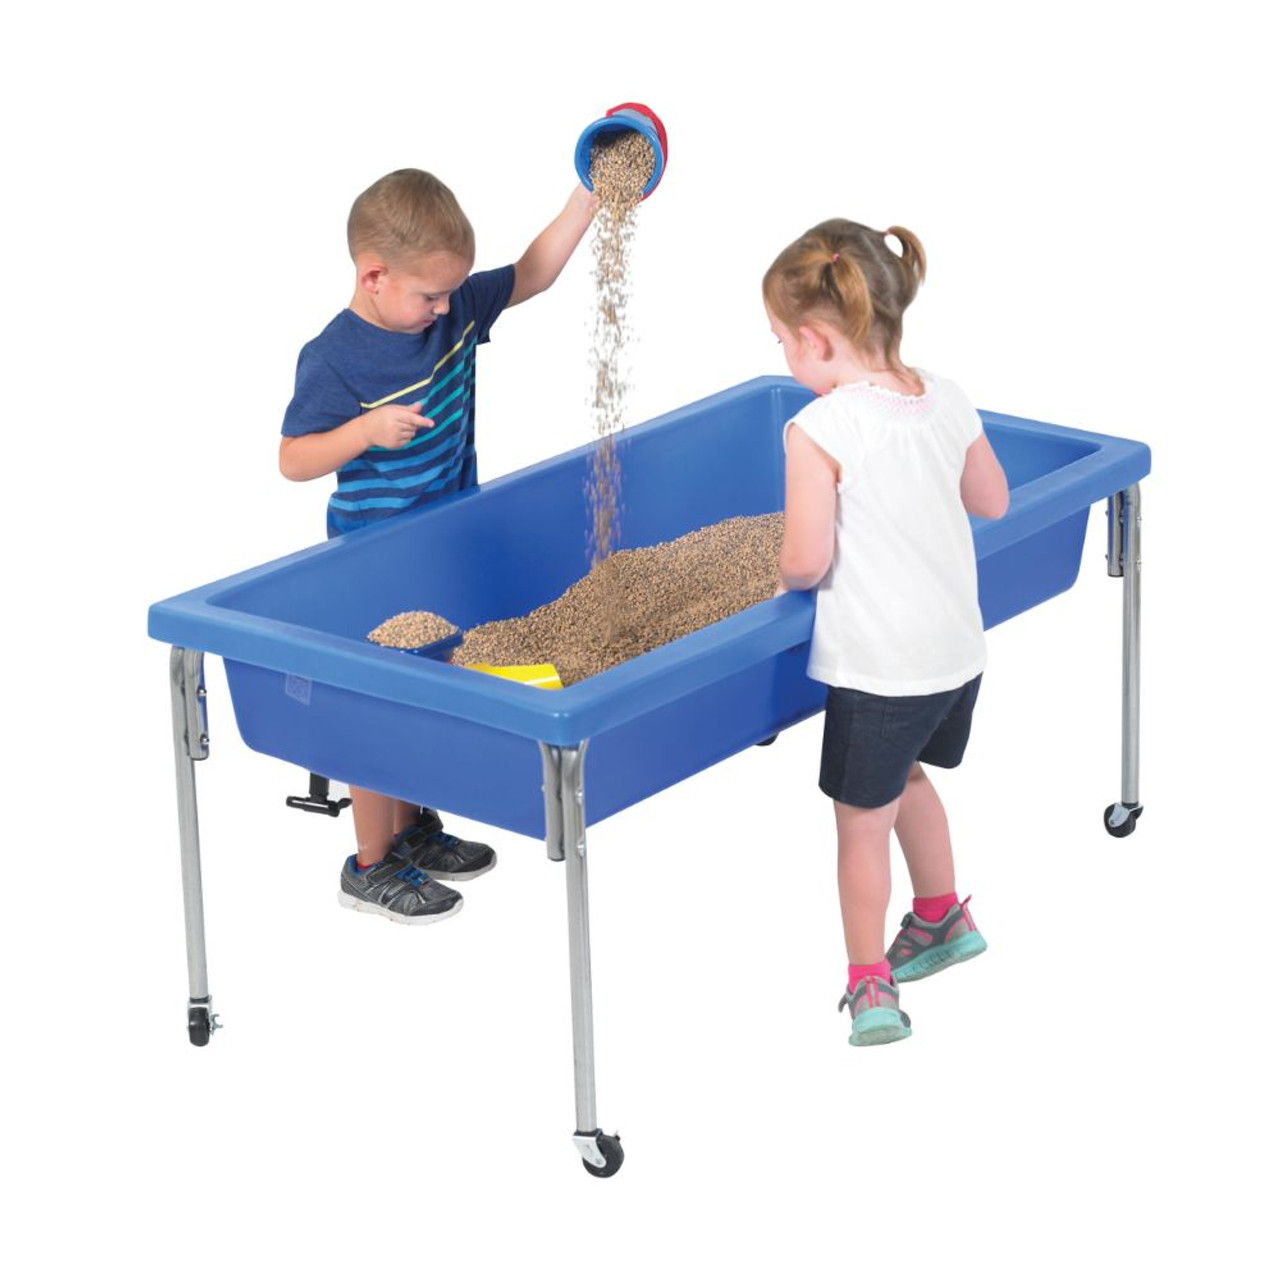 Activity Table and Lid Set - use